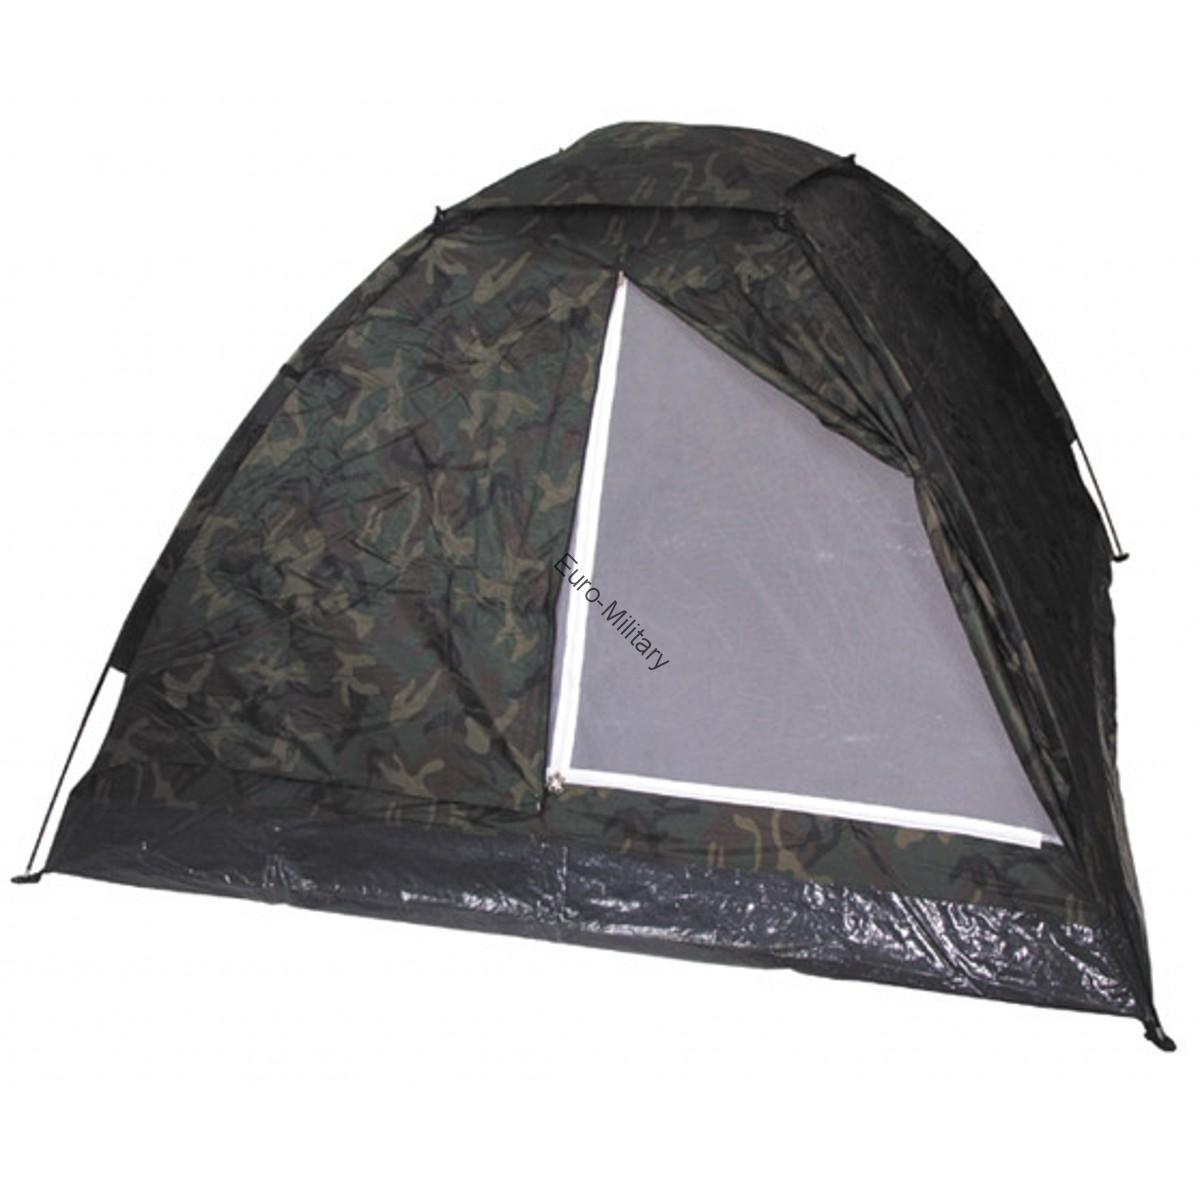 Military Tactical 3 Man Monodom Outdoor Woodland Camo Shelter Tent